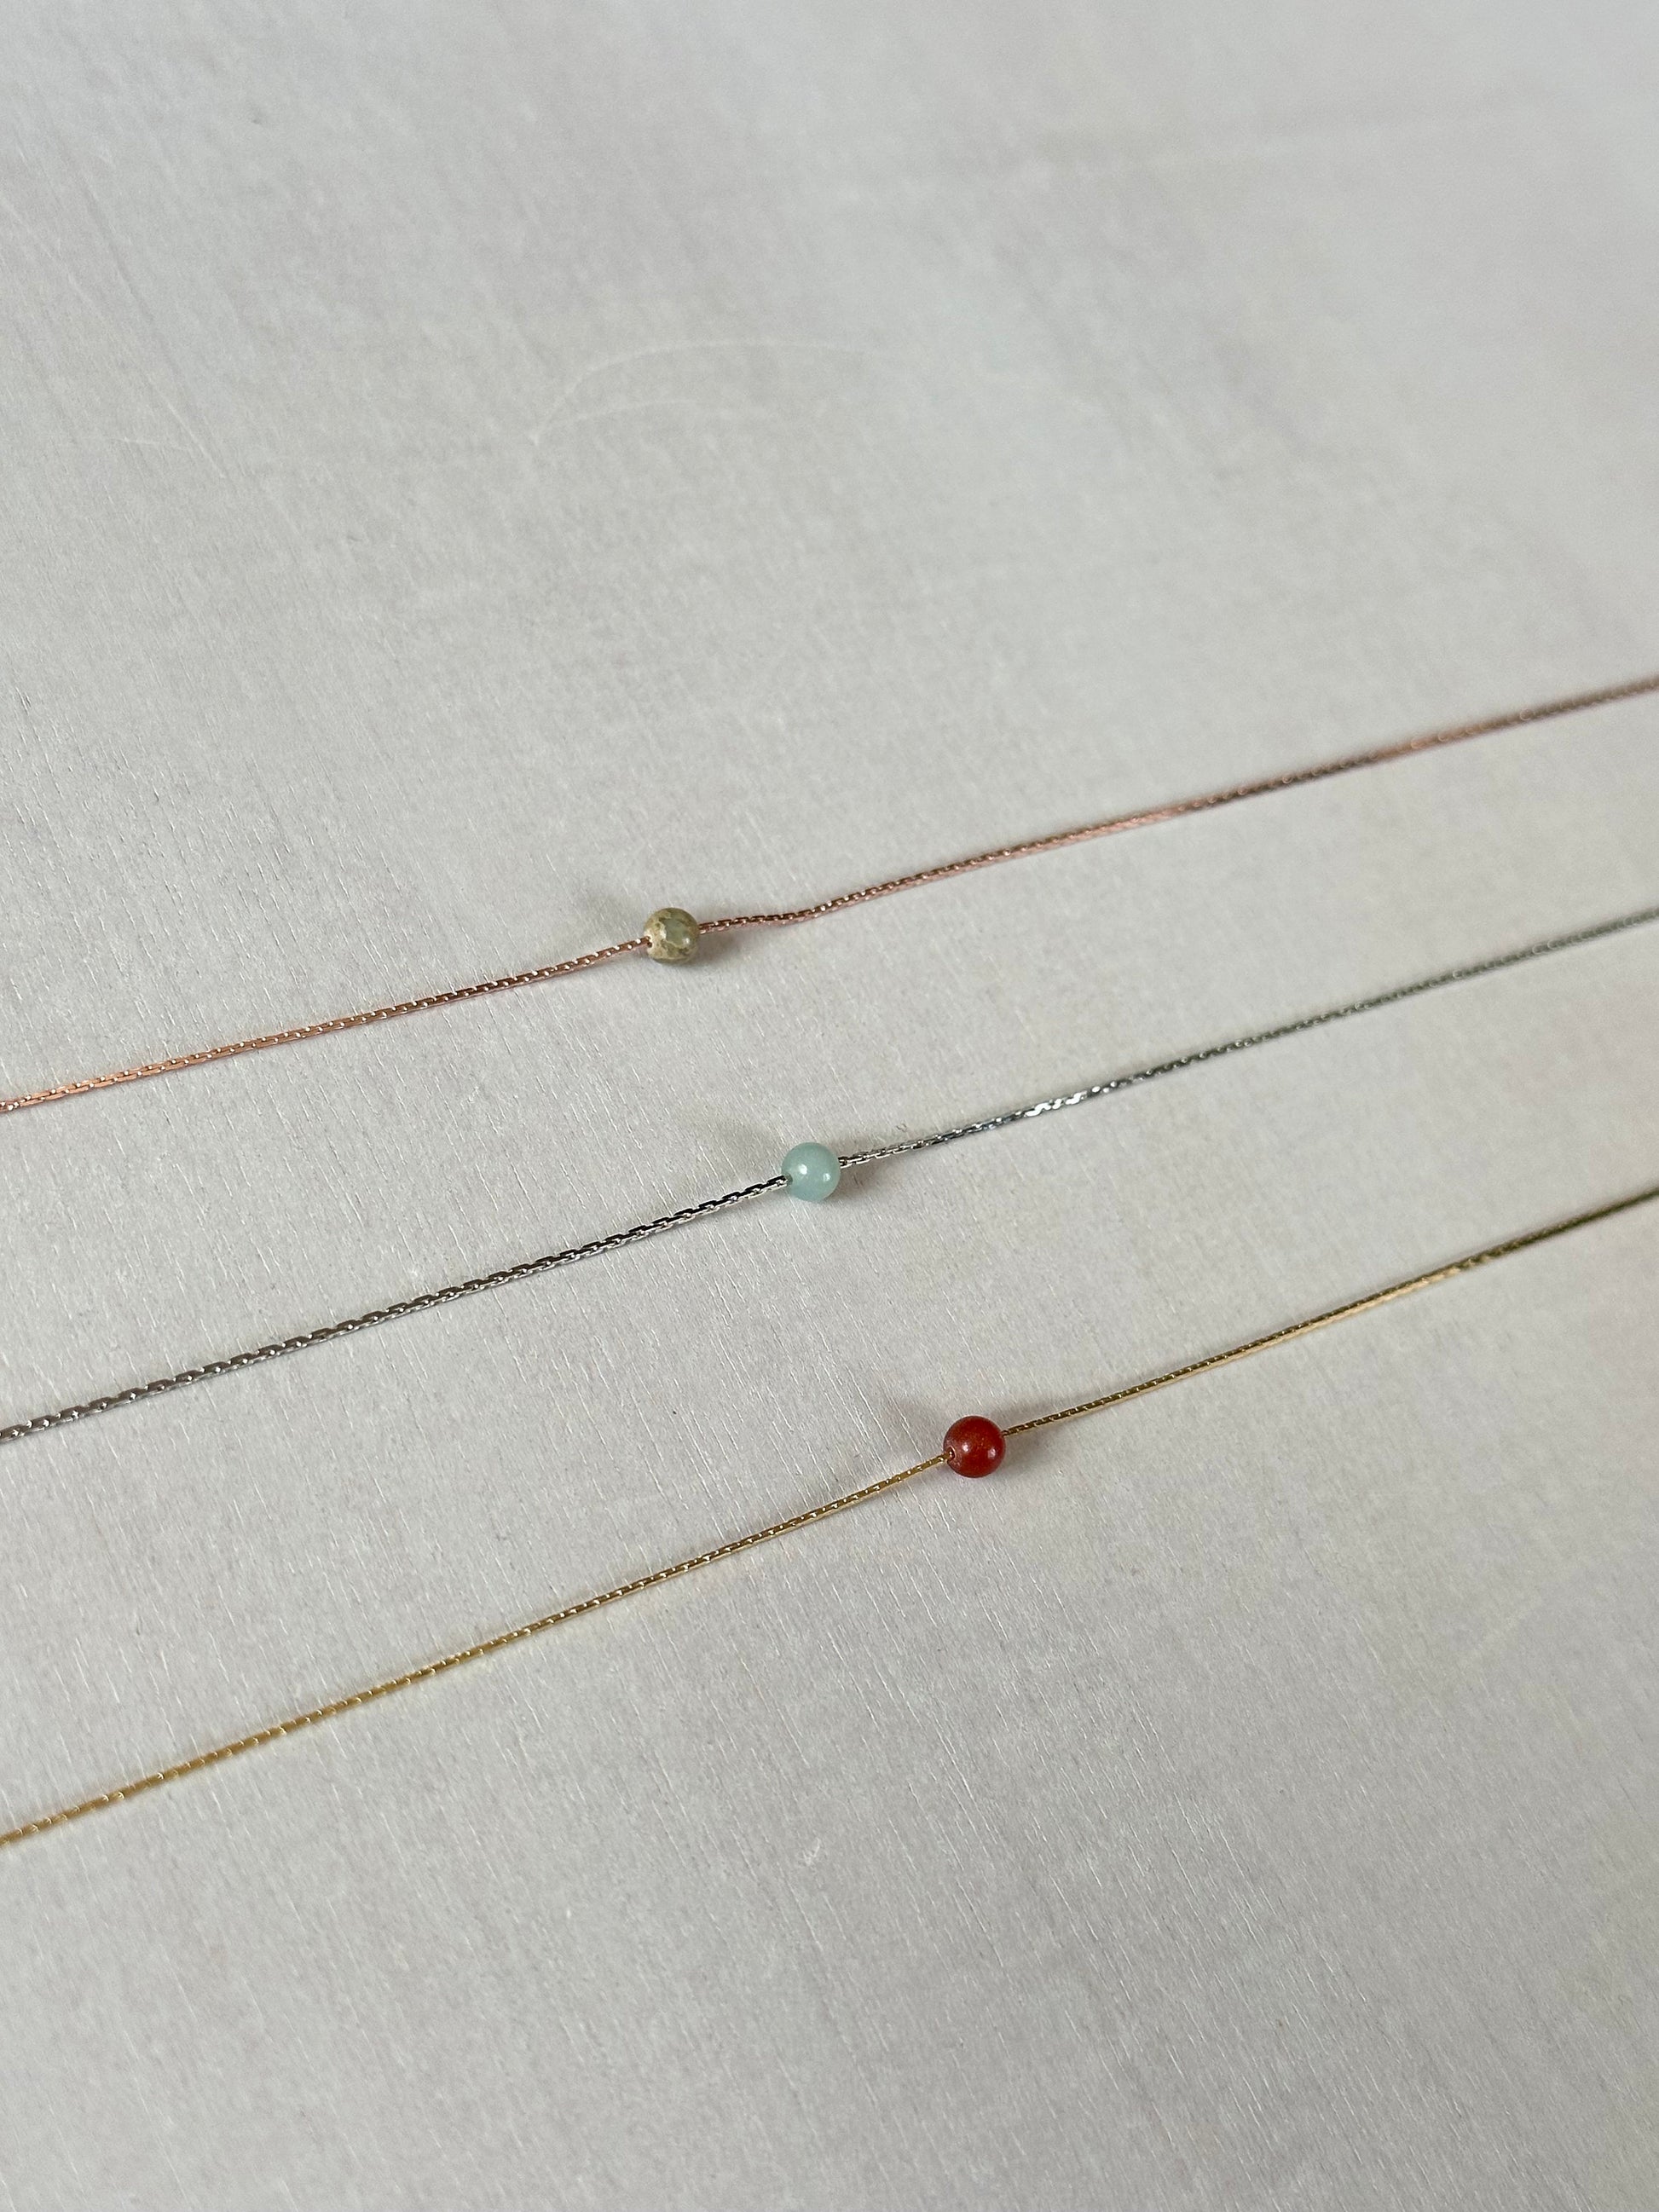 African Opal Necklace | Rose Gold | Gold | Silver | Dainty Necklace | Layering Necklace | Gemstone Necklace | Bead Necklace